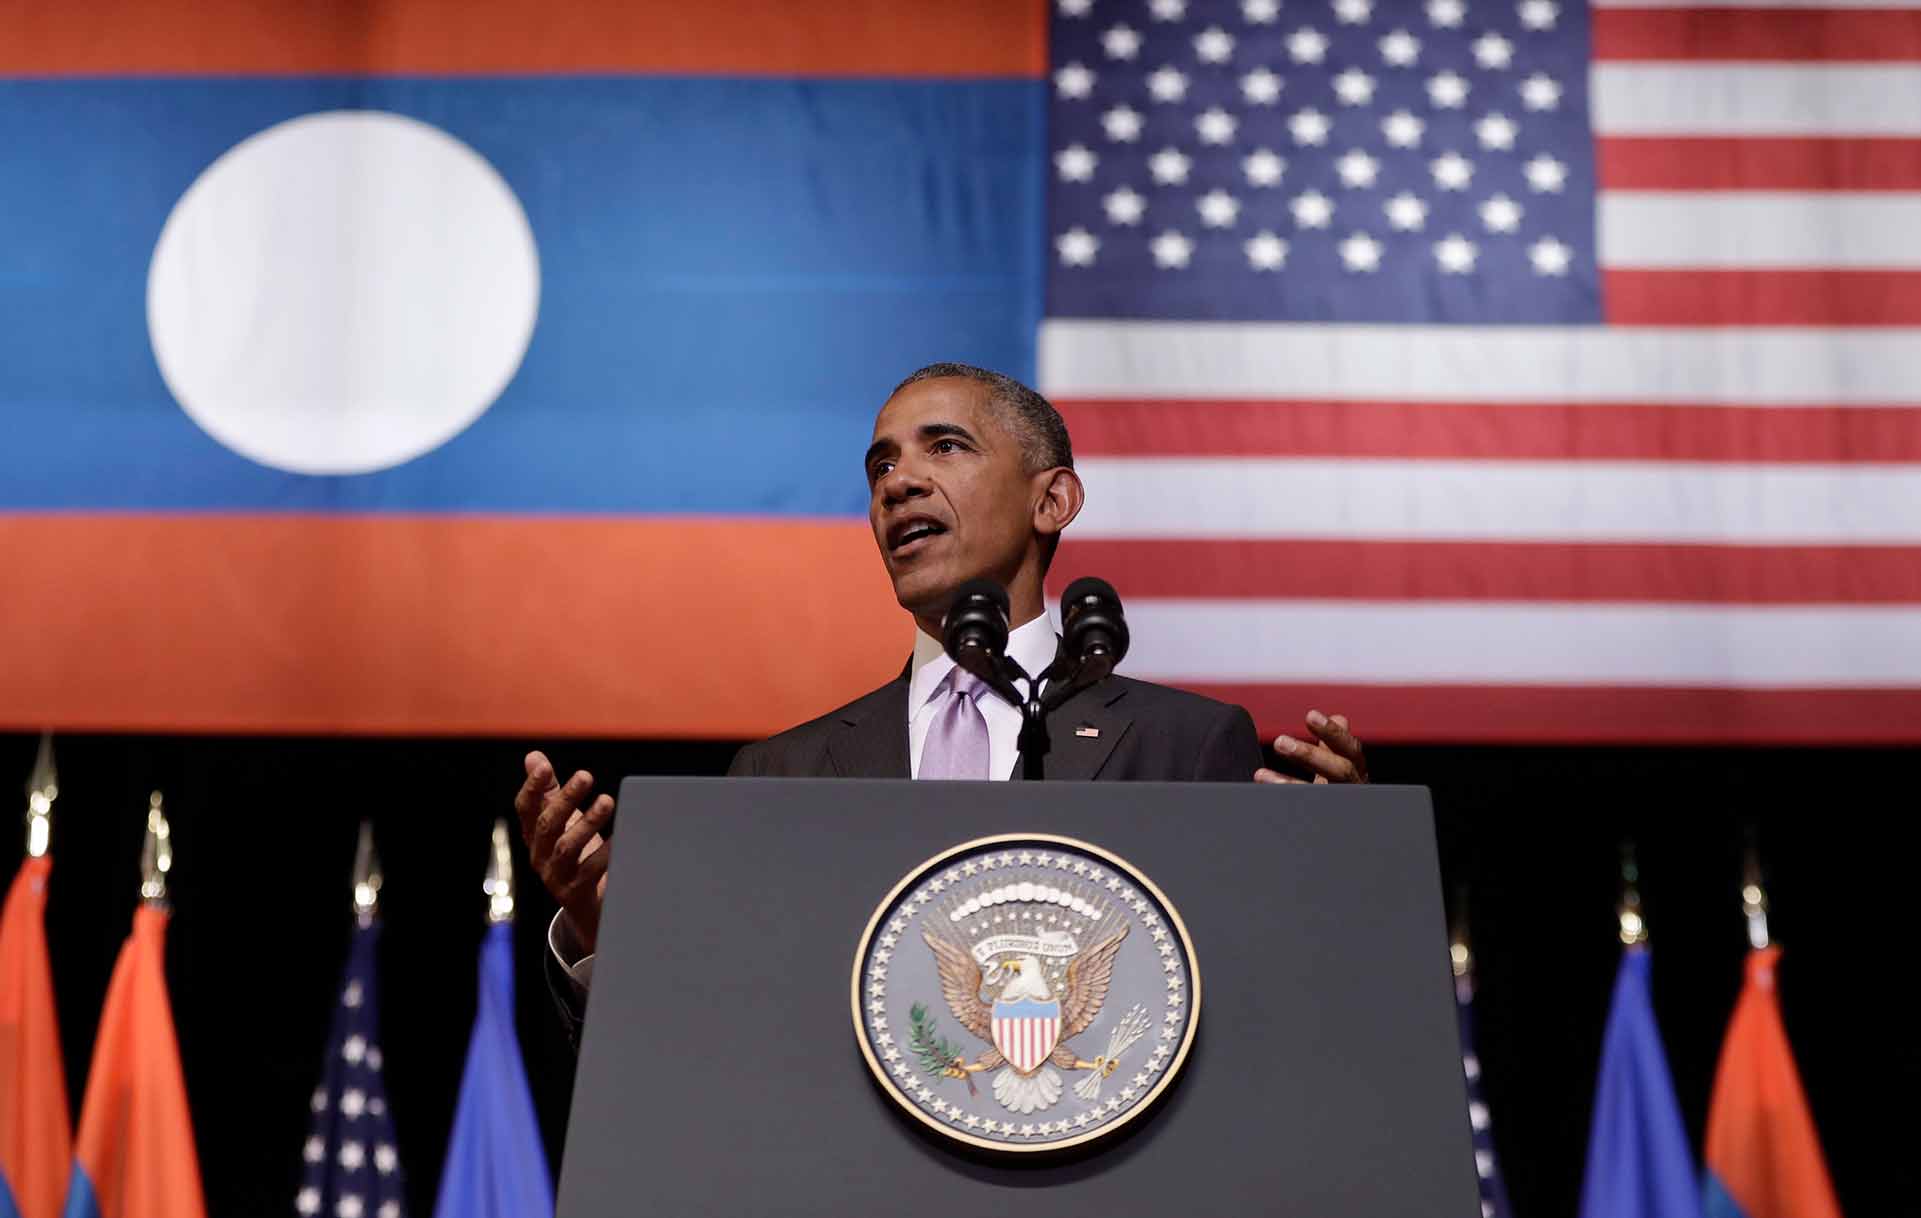 FULL TEXT: Barack Obama’s remarks in Laos